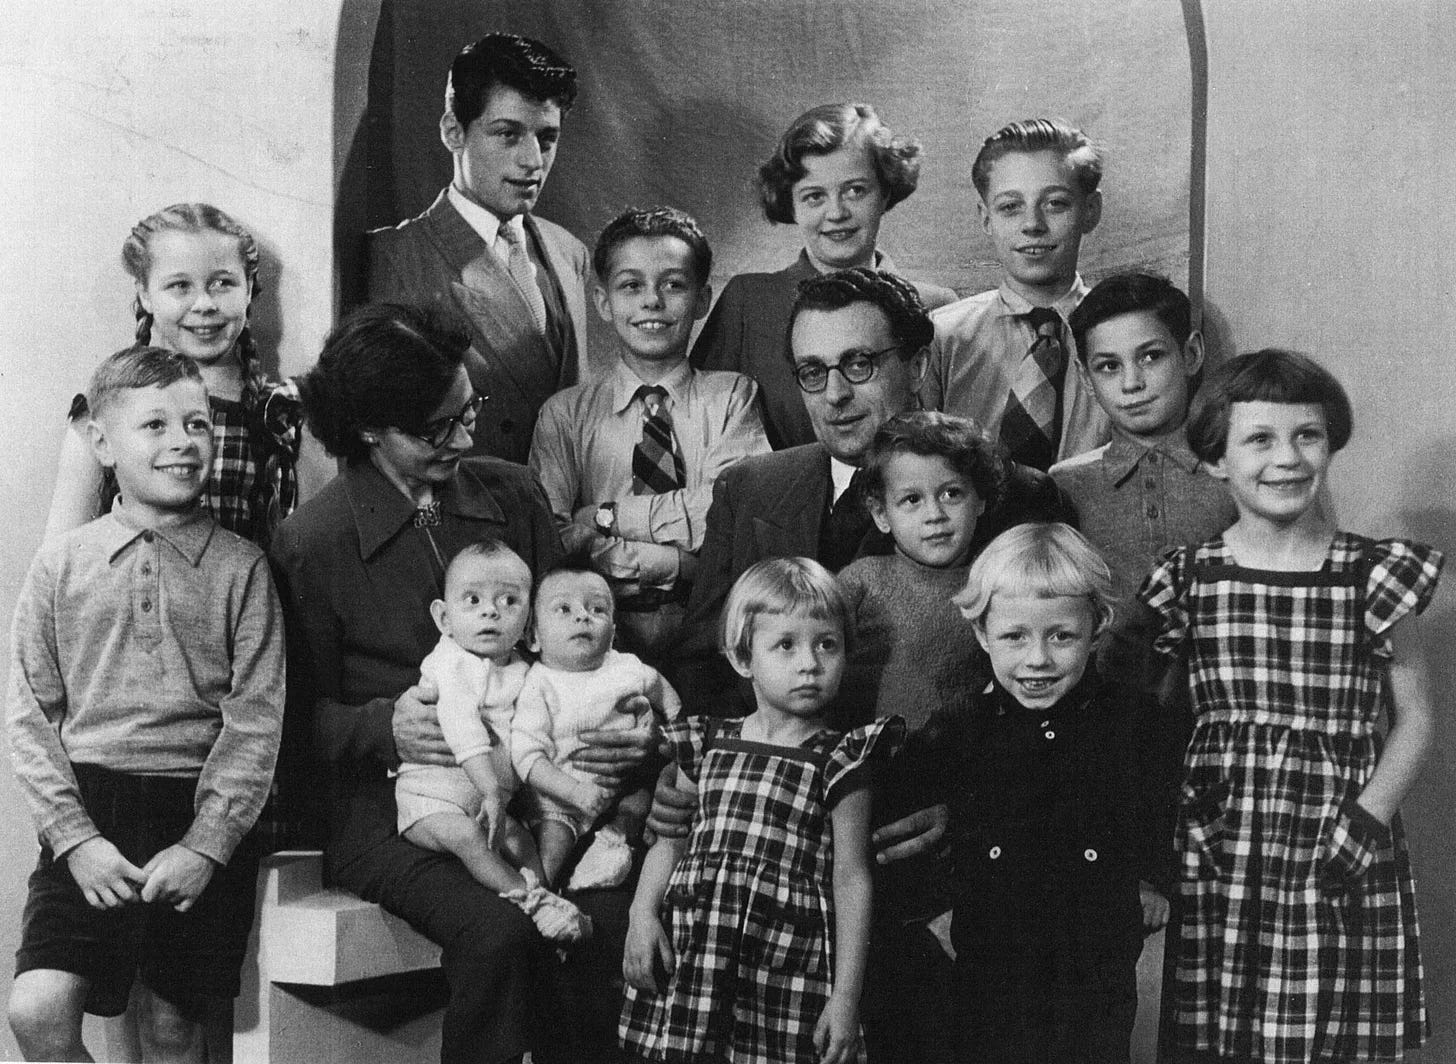 The Gulikers family, immigrants who moved from the Netherlands to Australia and the United States after World War II.